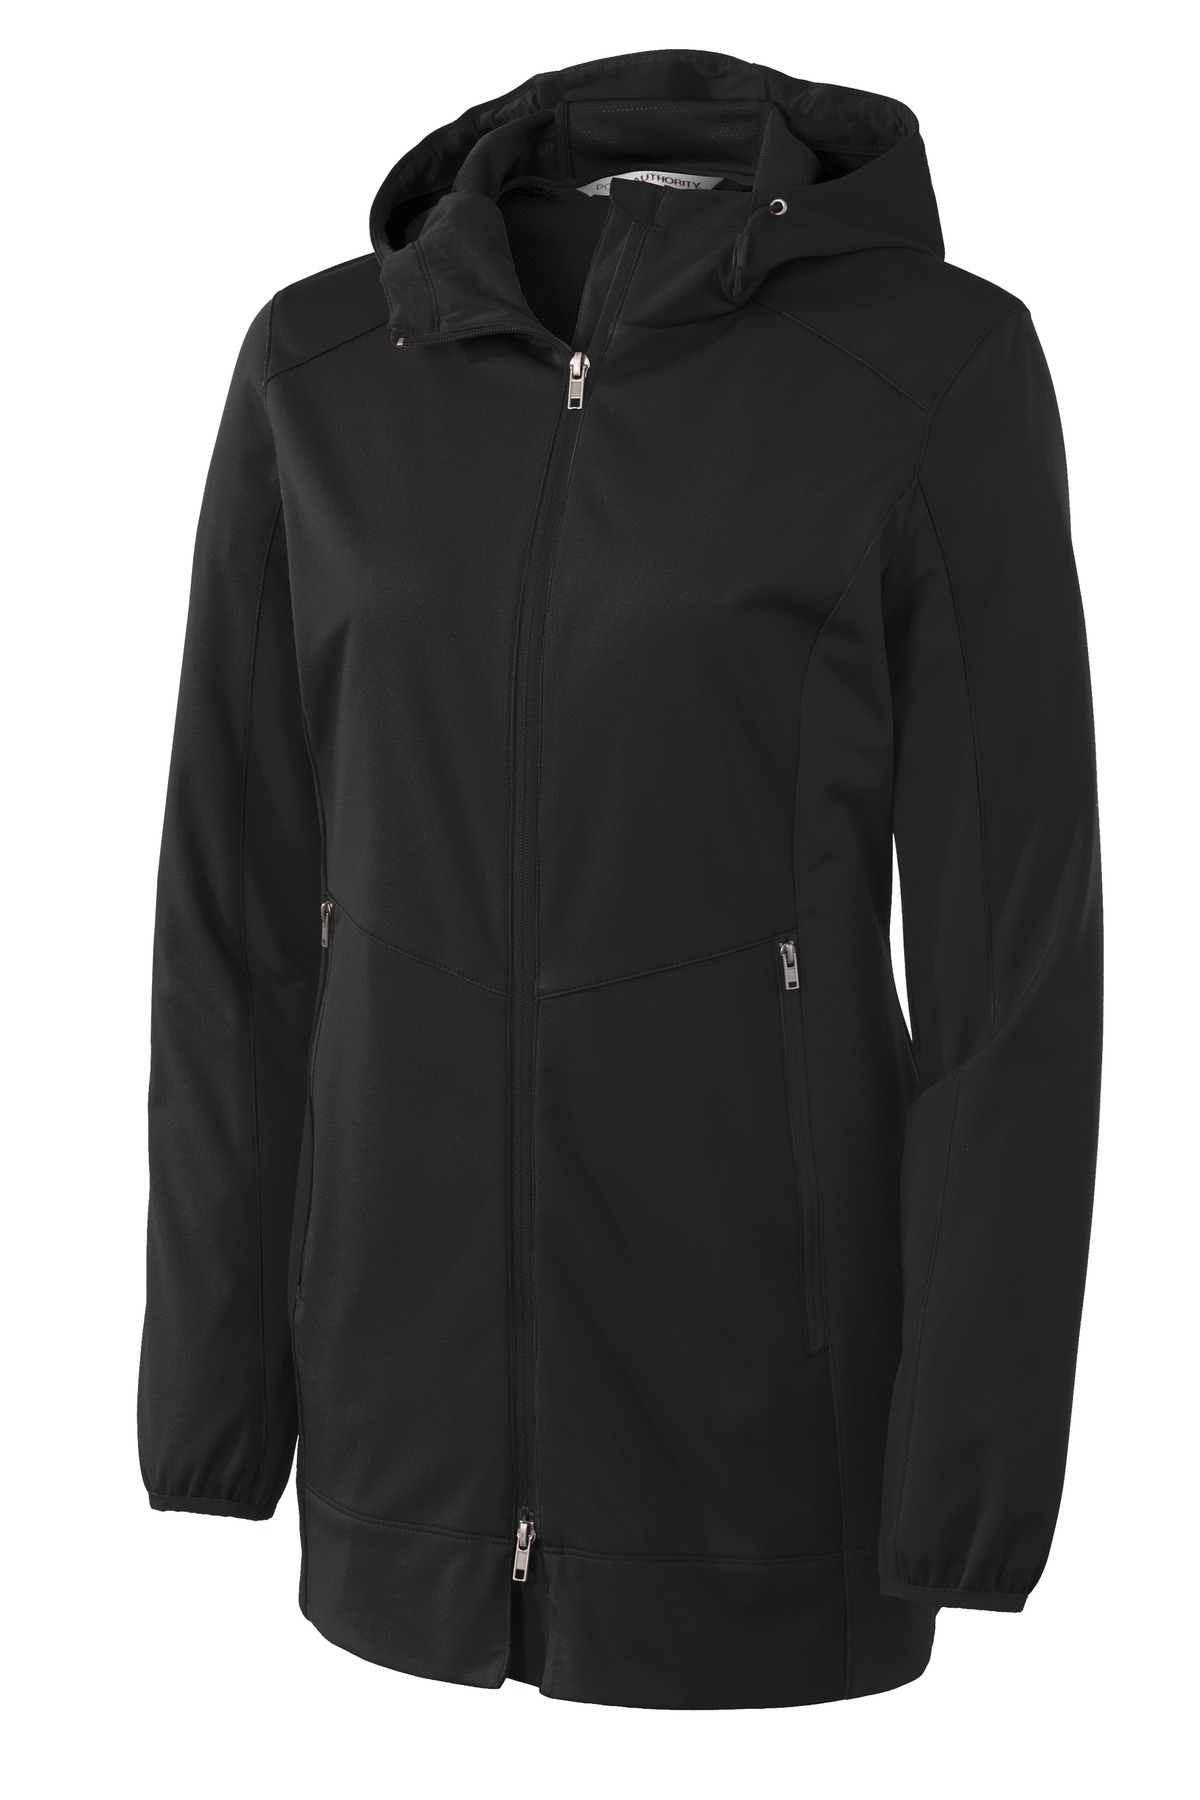 Port Authority Ladies Active Hooded Soft Shell Jacket-XS (Deep Black) - image 5 of 6